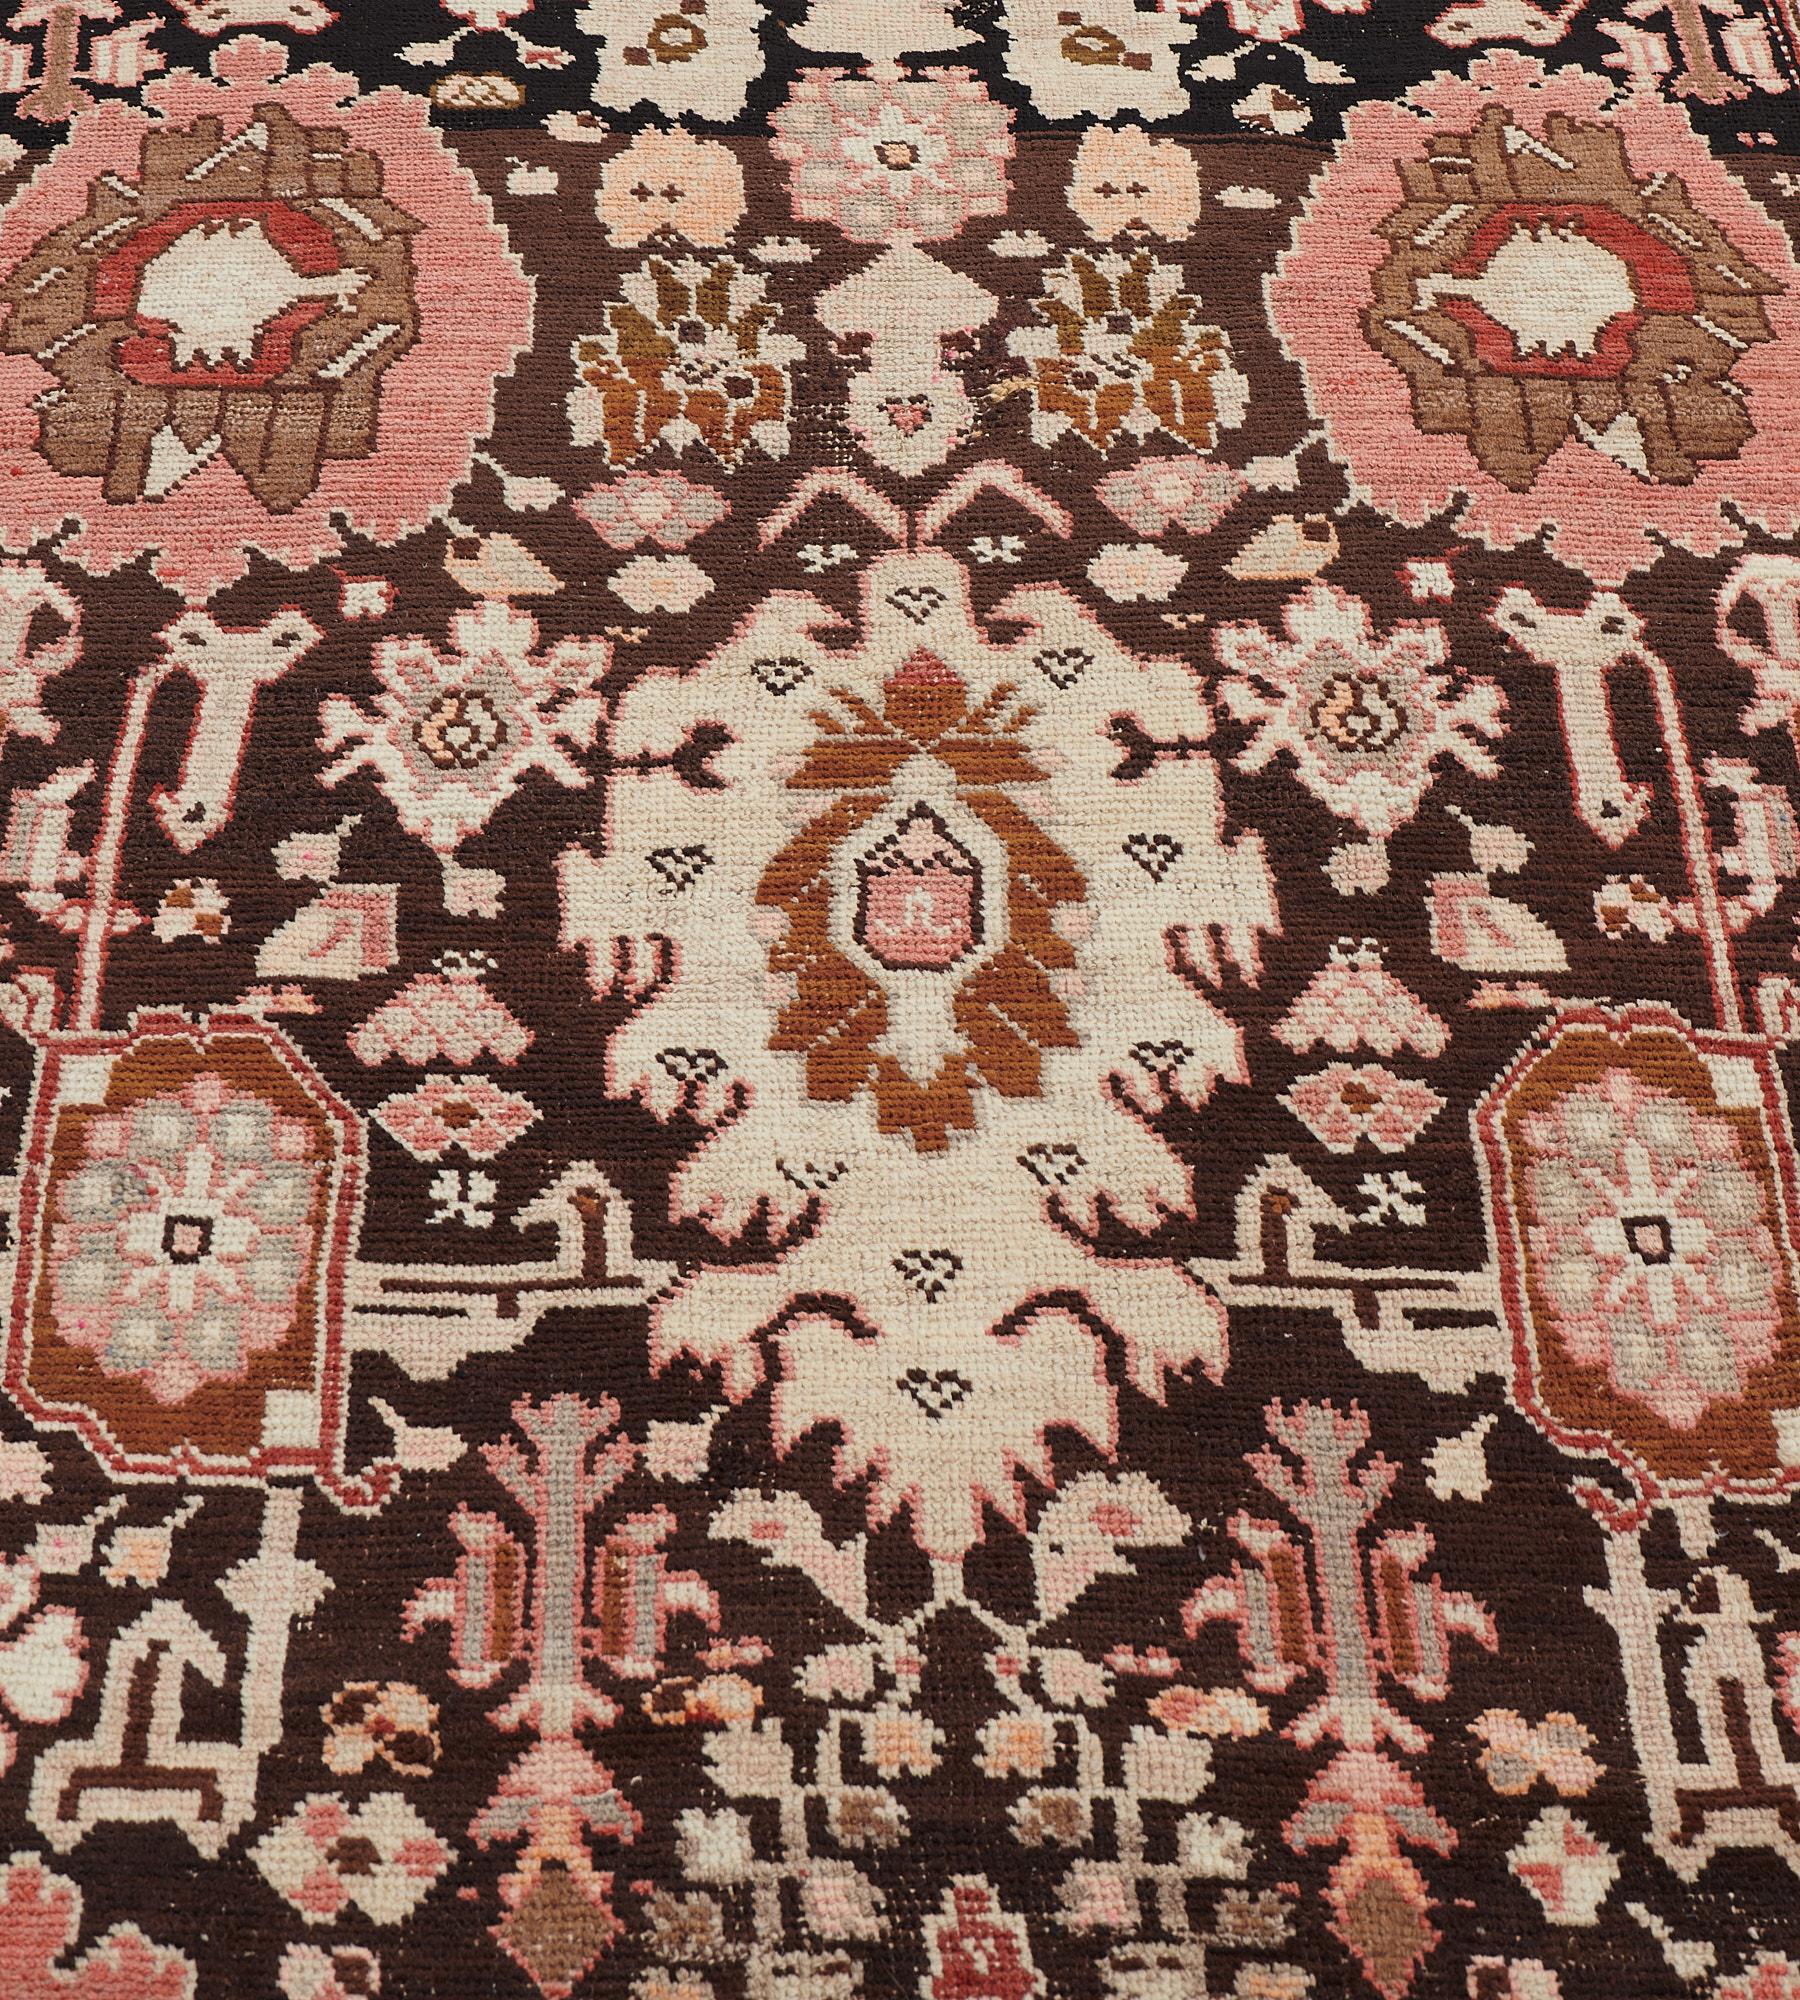 This antique, circa 1890, Karabagh runner has a chocolate-brown field with an overall design of bold brick-red, mole-brown and terracotta-red palmettes linked by angular floral vine and tiny animal figures, in a brick-red border of angular floral